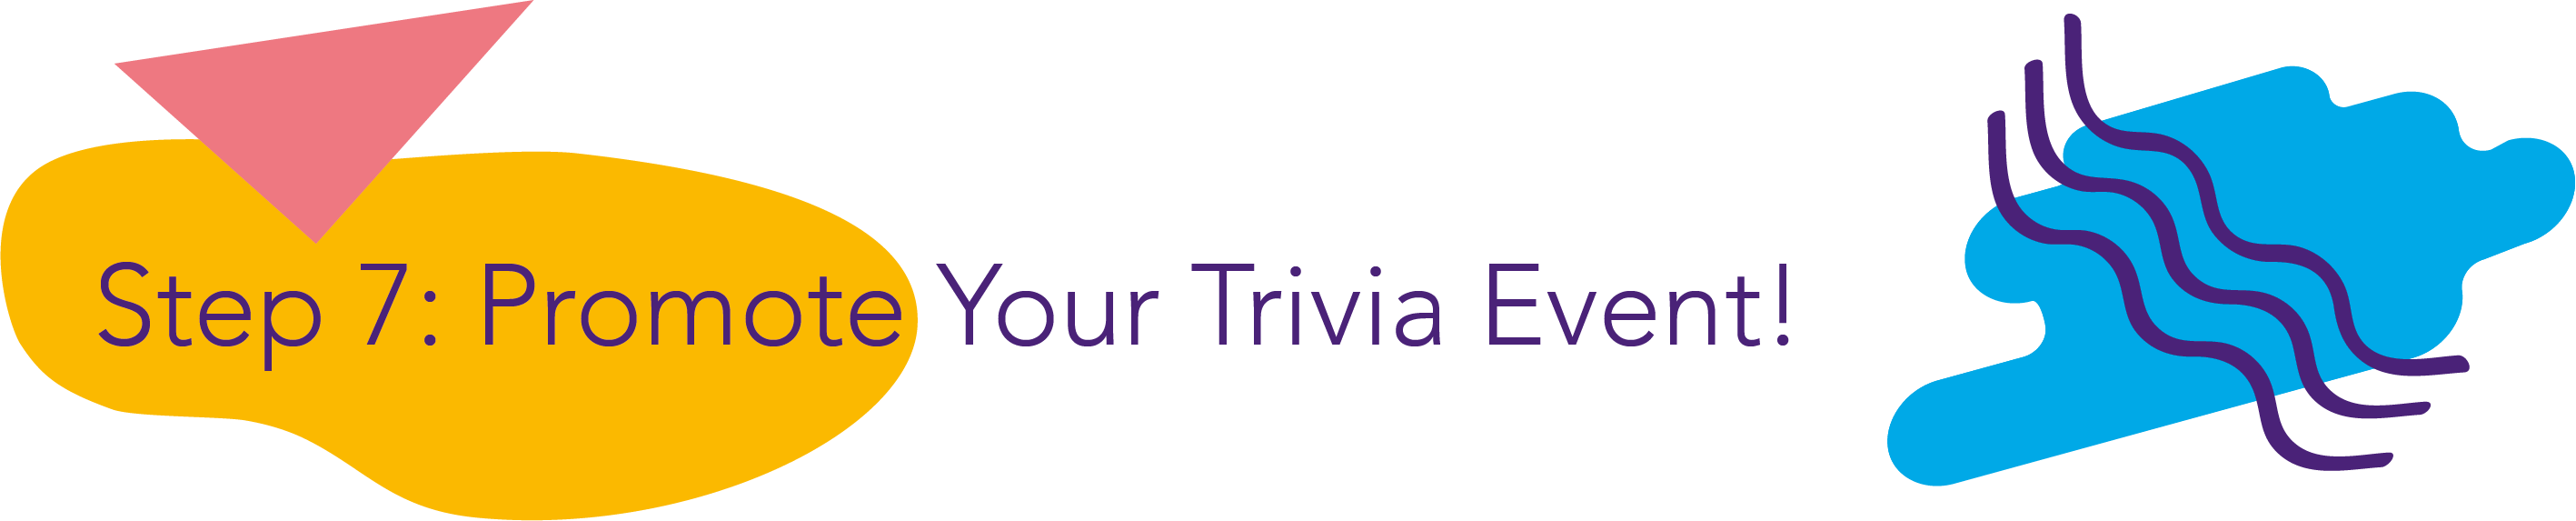 Step 7) Promote Your Trivia Event!